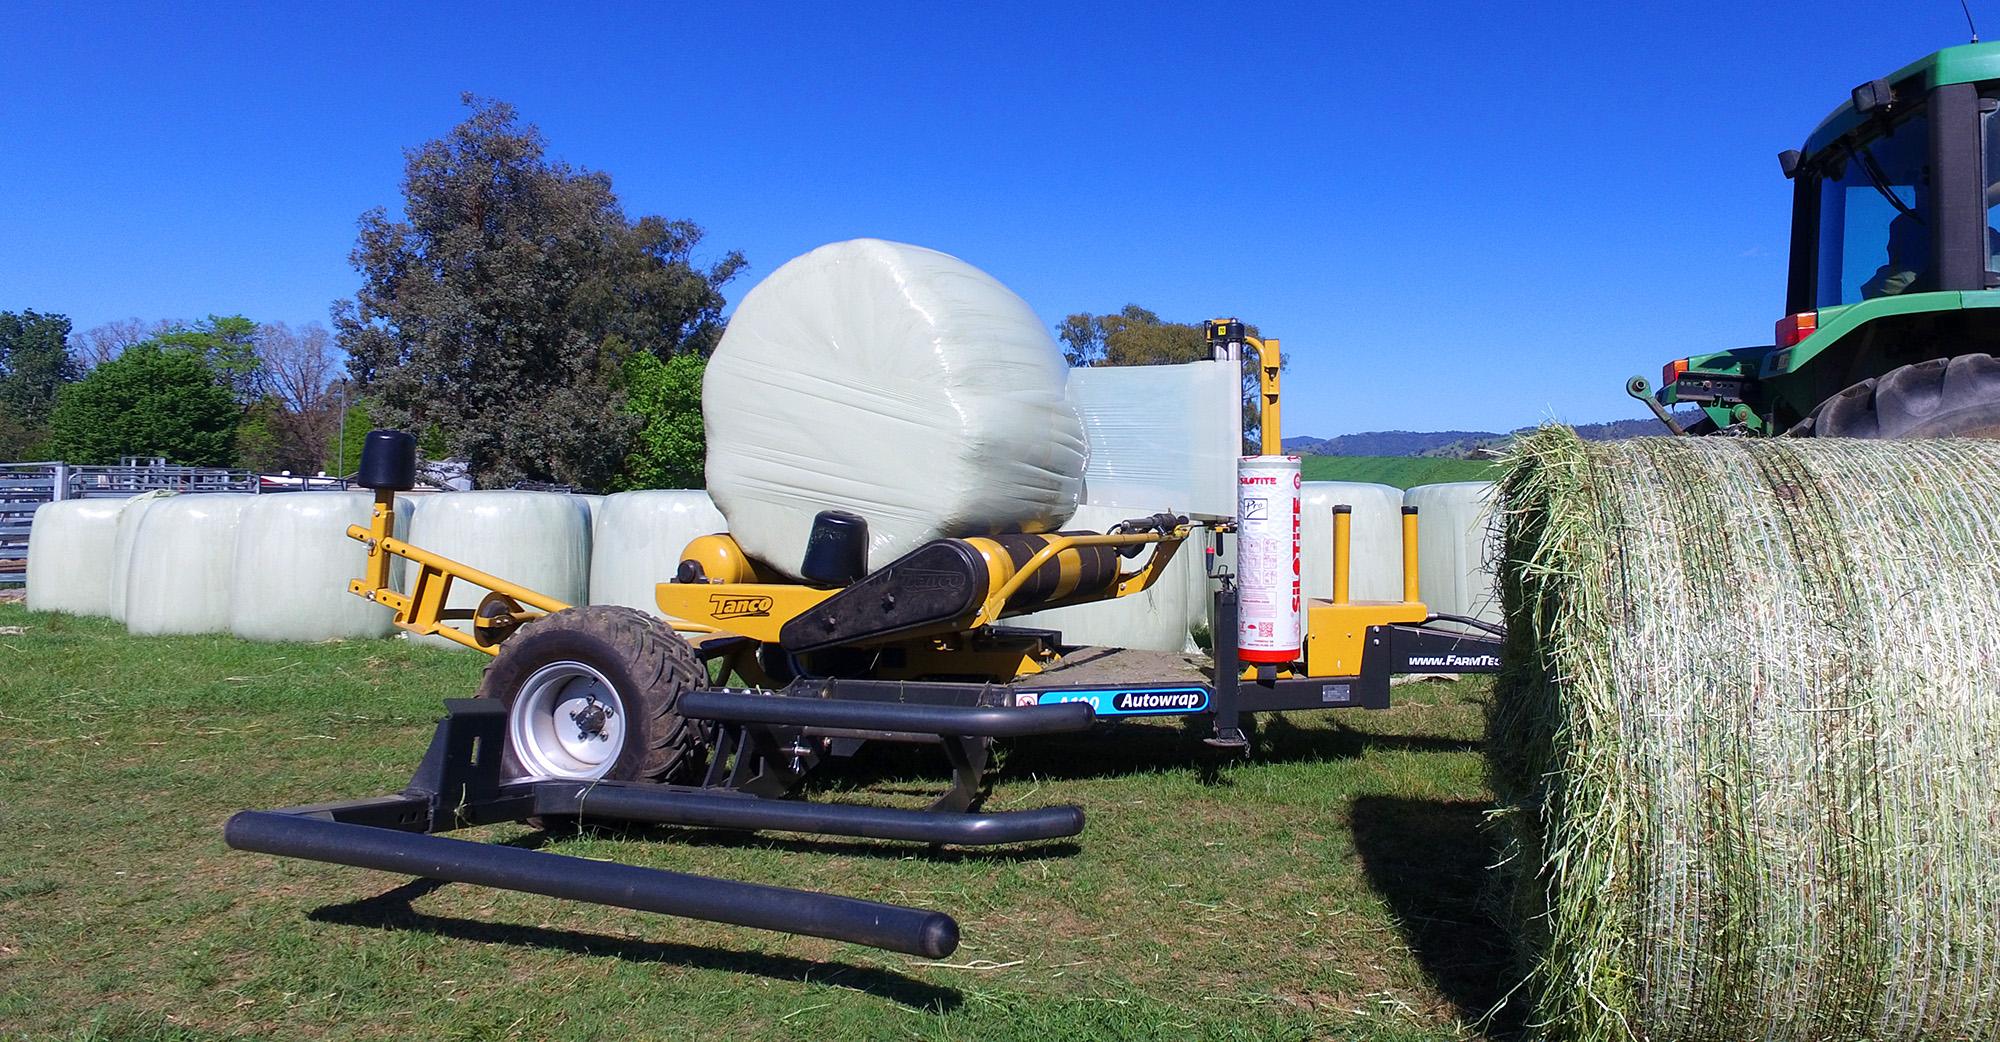 Why Choose FarmTech Bale Wrappers & Silage Equipment